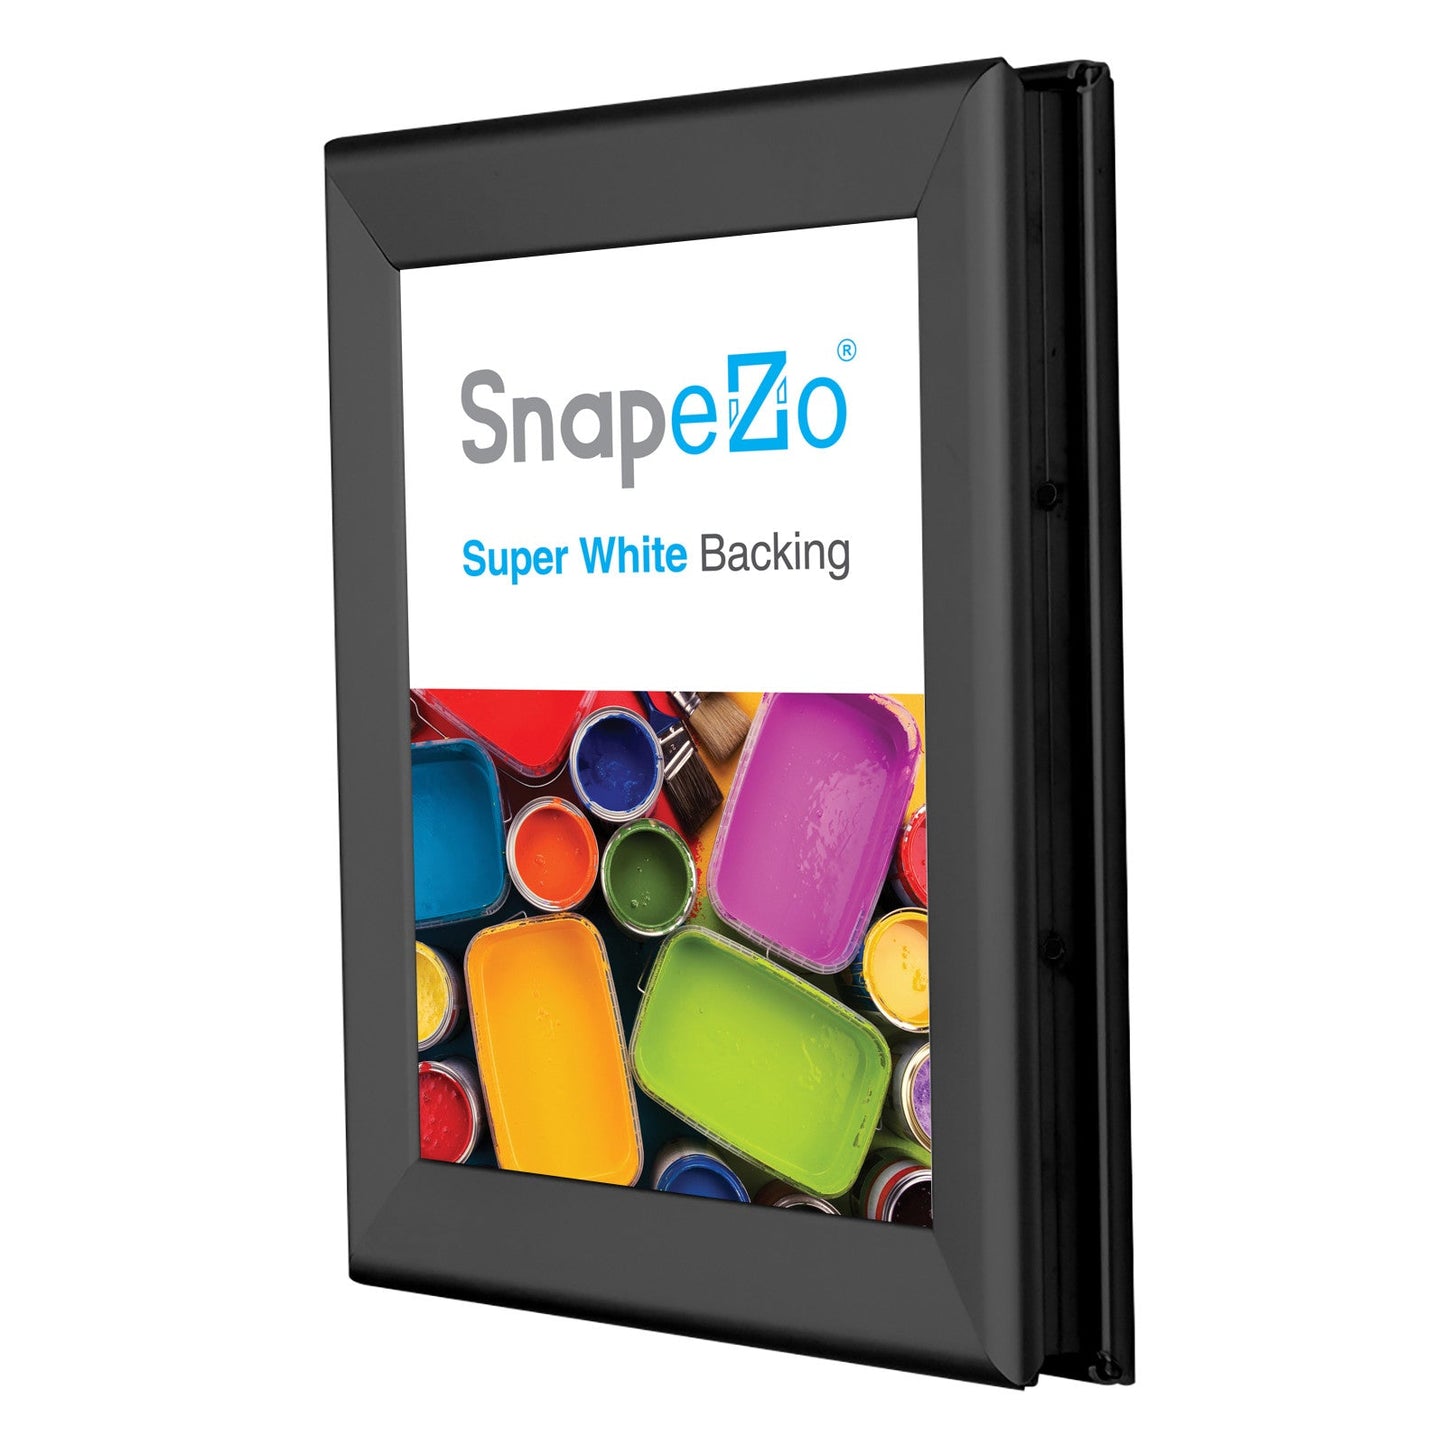 11x17 SnapeZo® Black Double-Sided Snap Frame 1.25" Profile Width